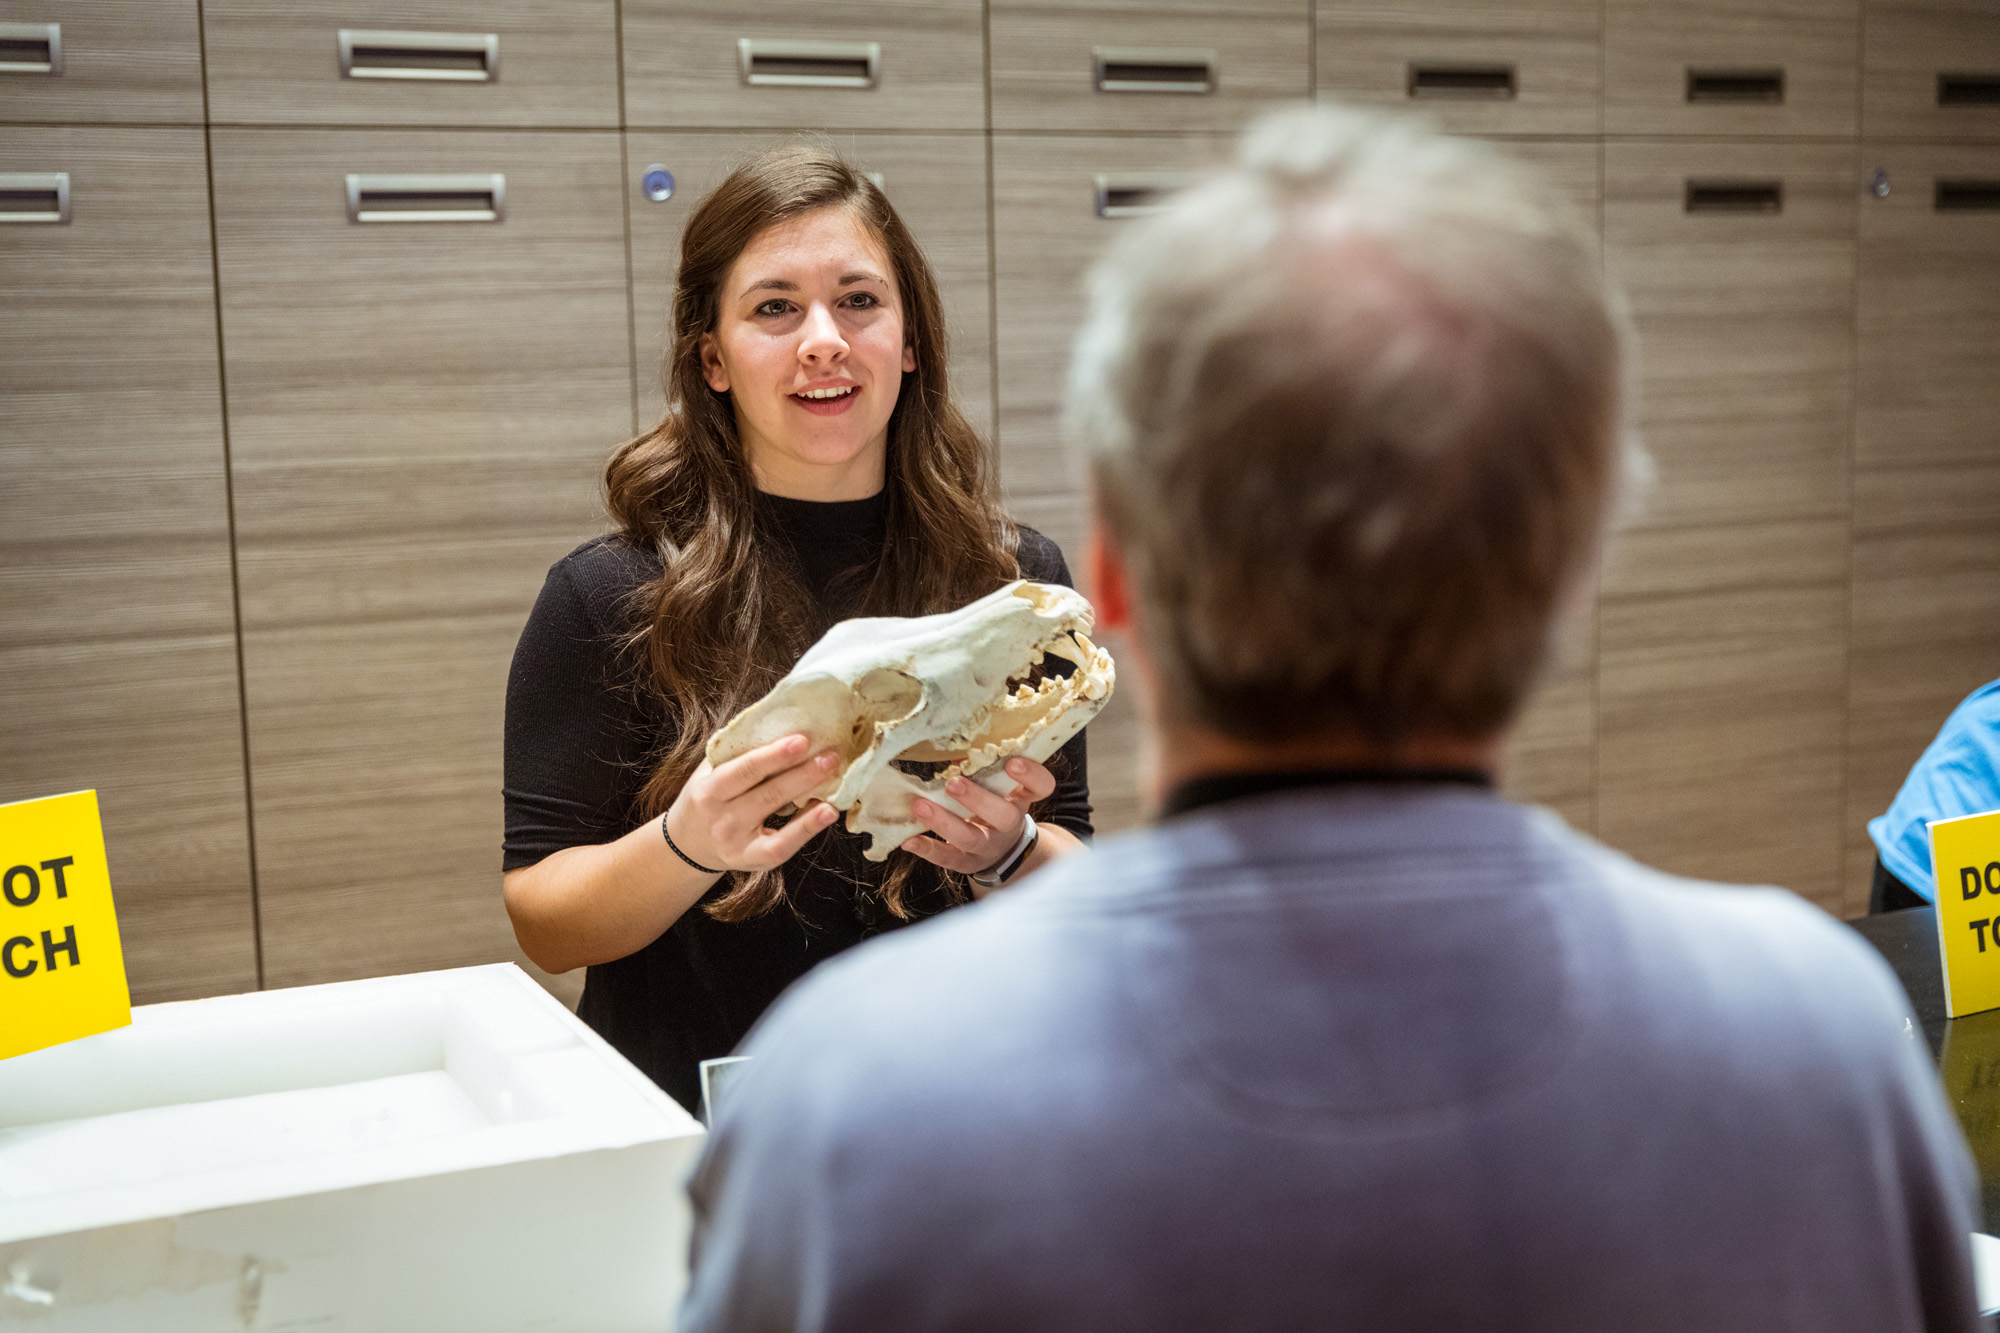 A volunteer shares a skull with a visitor to the Grainger Science Hub during a Meet a Scientist Event. The volunteer holds the skull up while speaking with the visitor who is standing directly in front of the volunteer with only the back of their head visible.